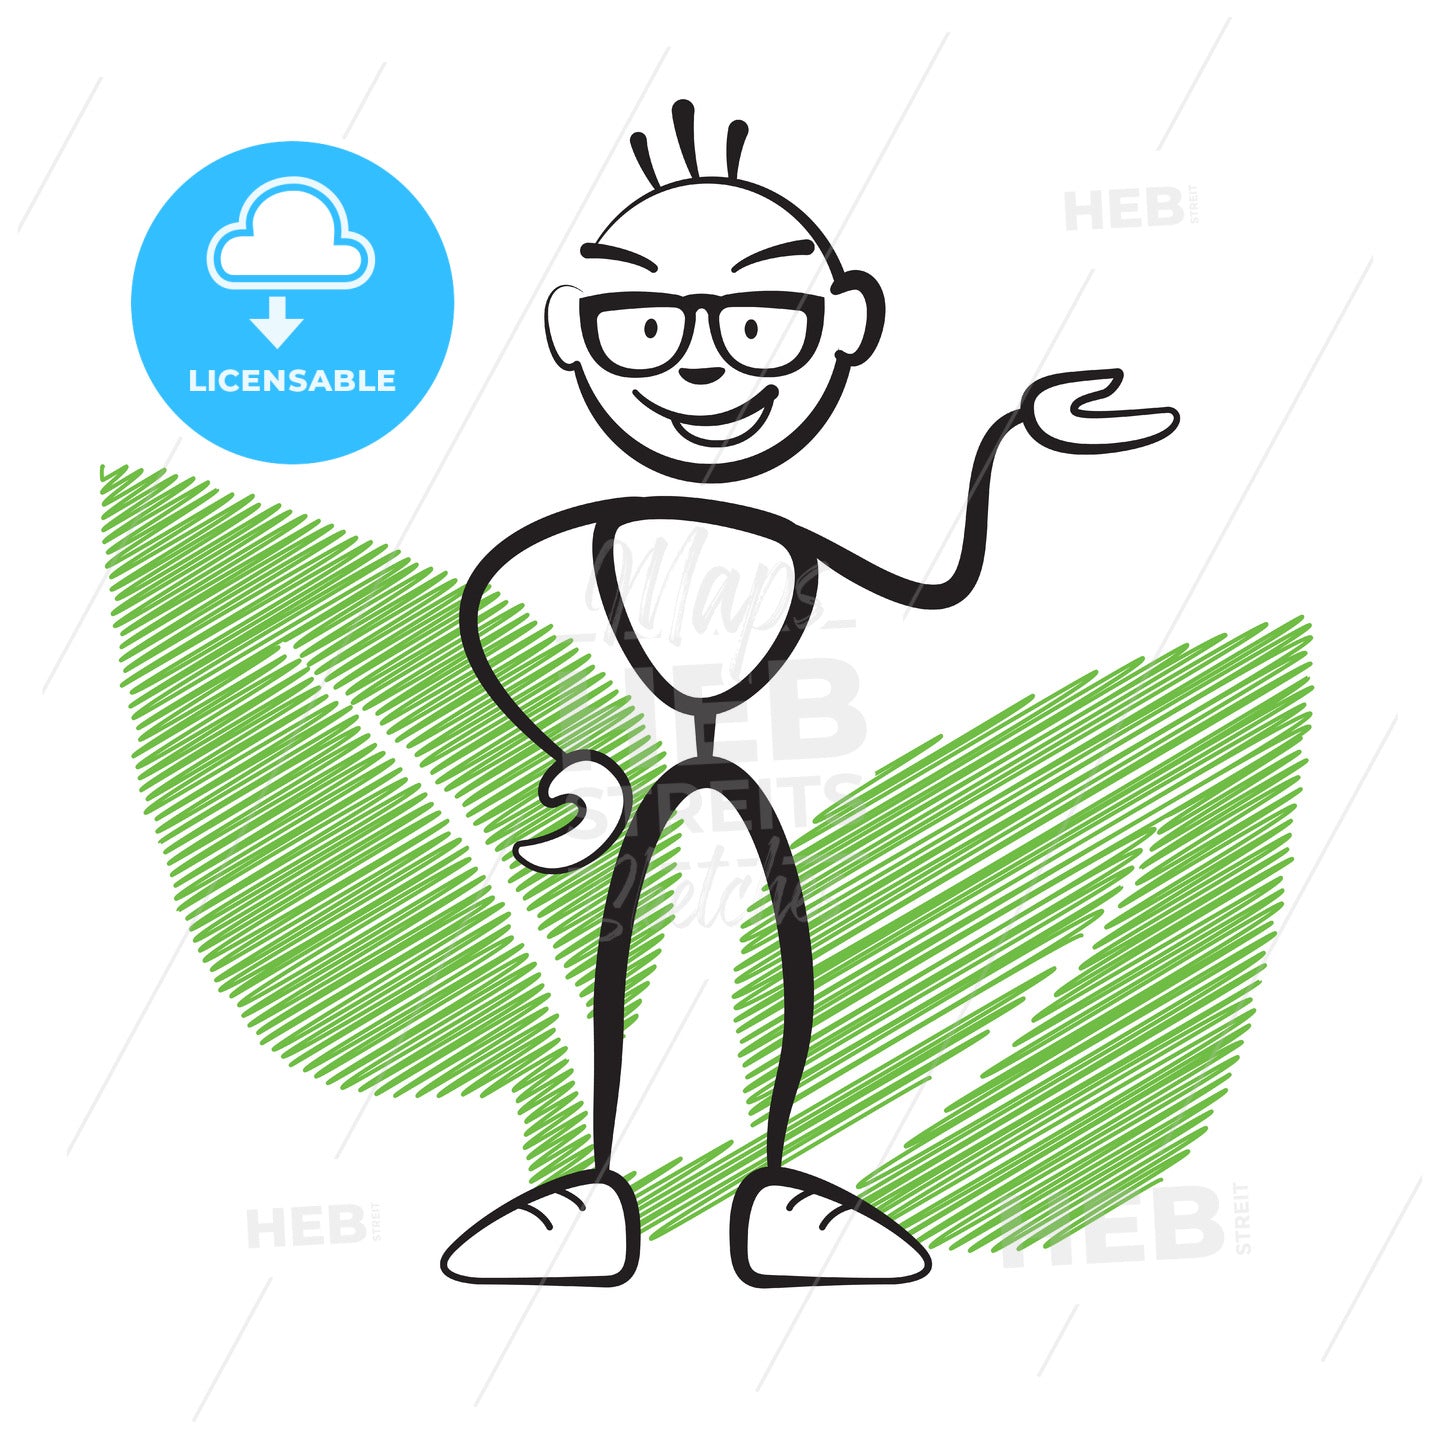 Stick figure with plant symbol – instant download